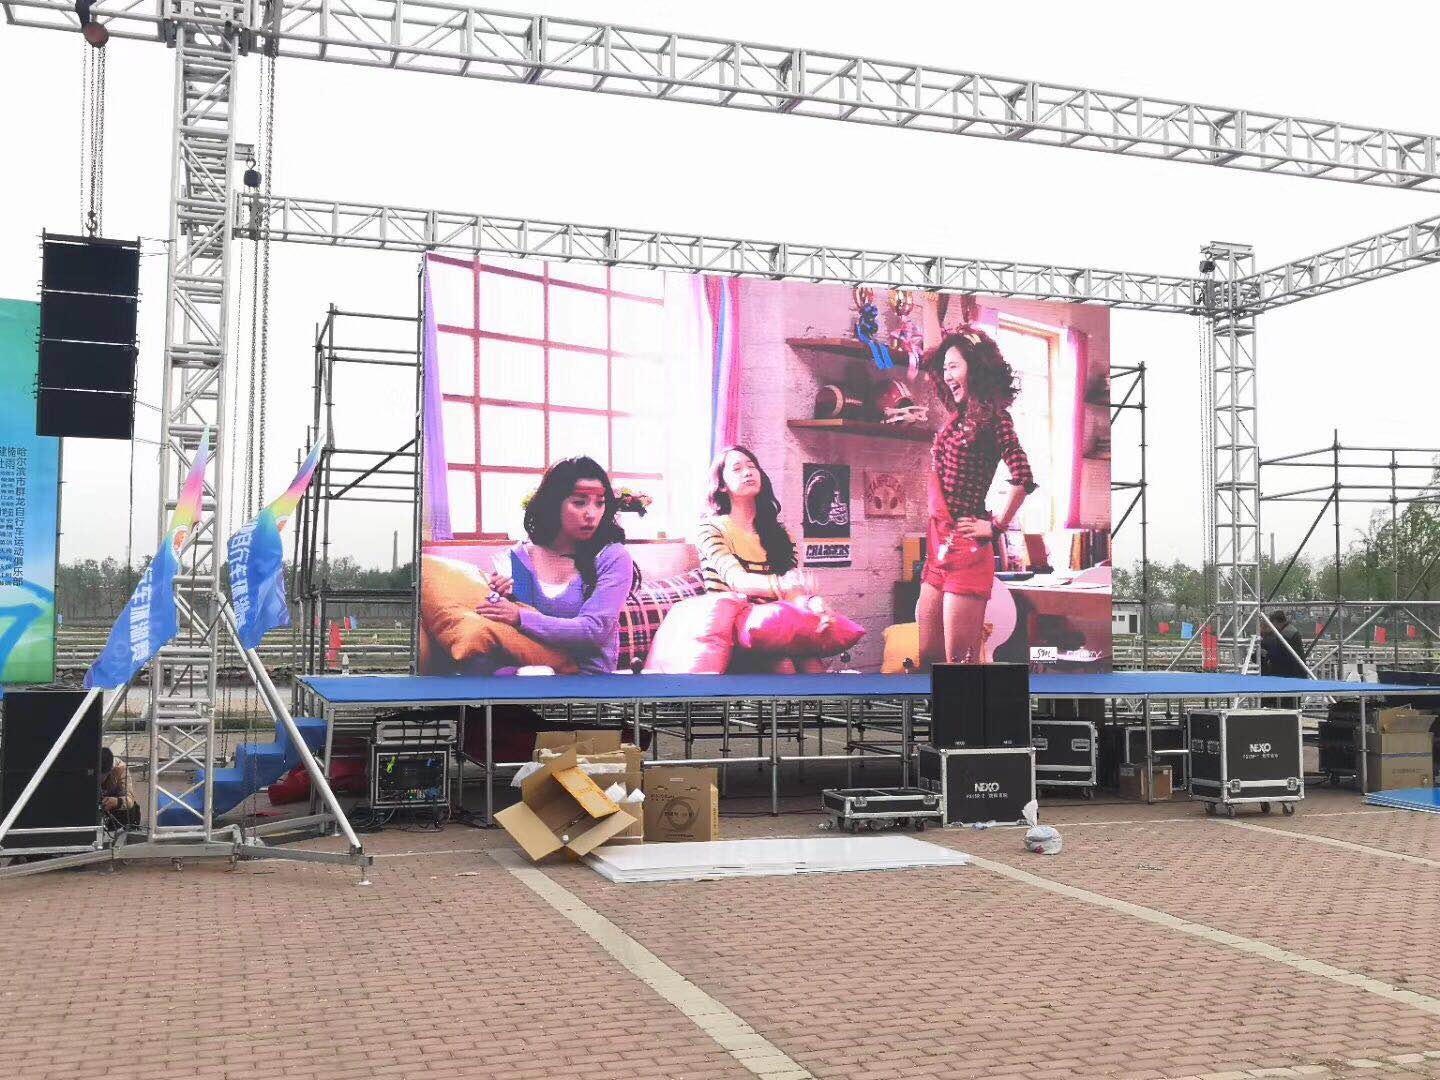 A makeshift stage was set up to show performances by Korean artists